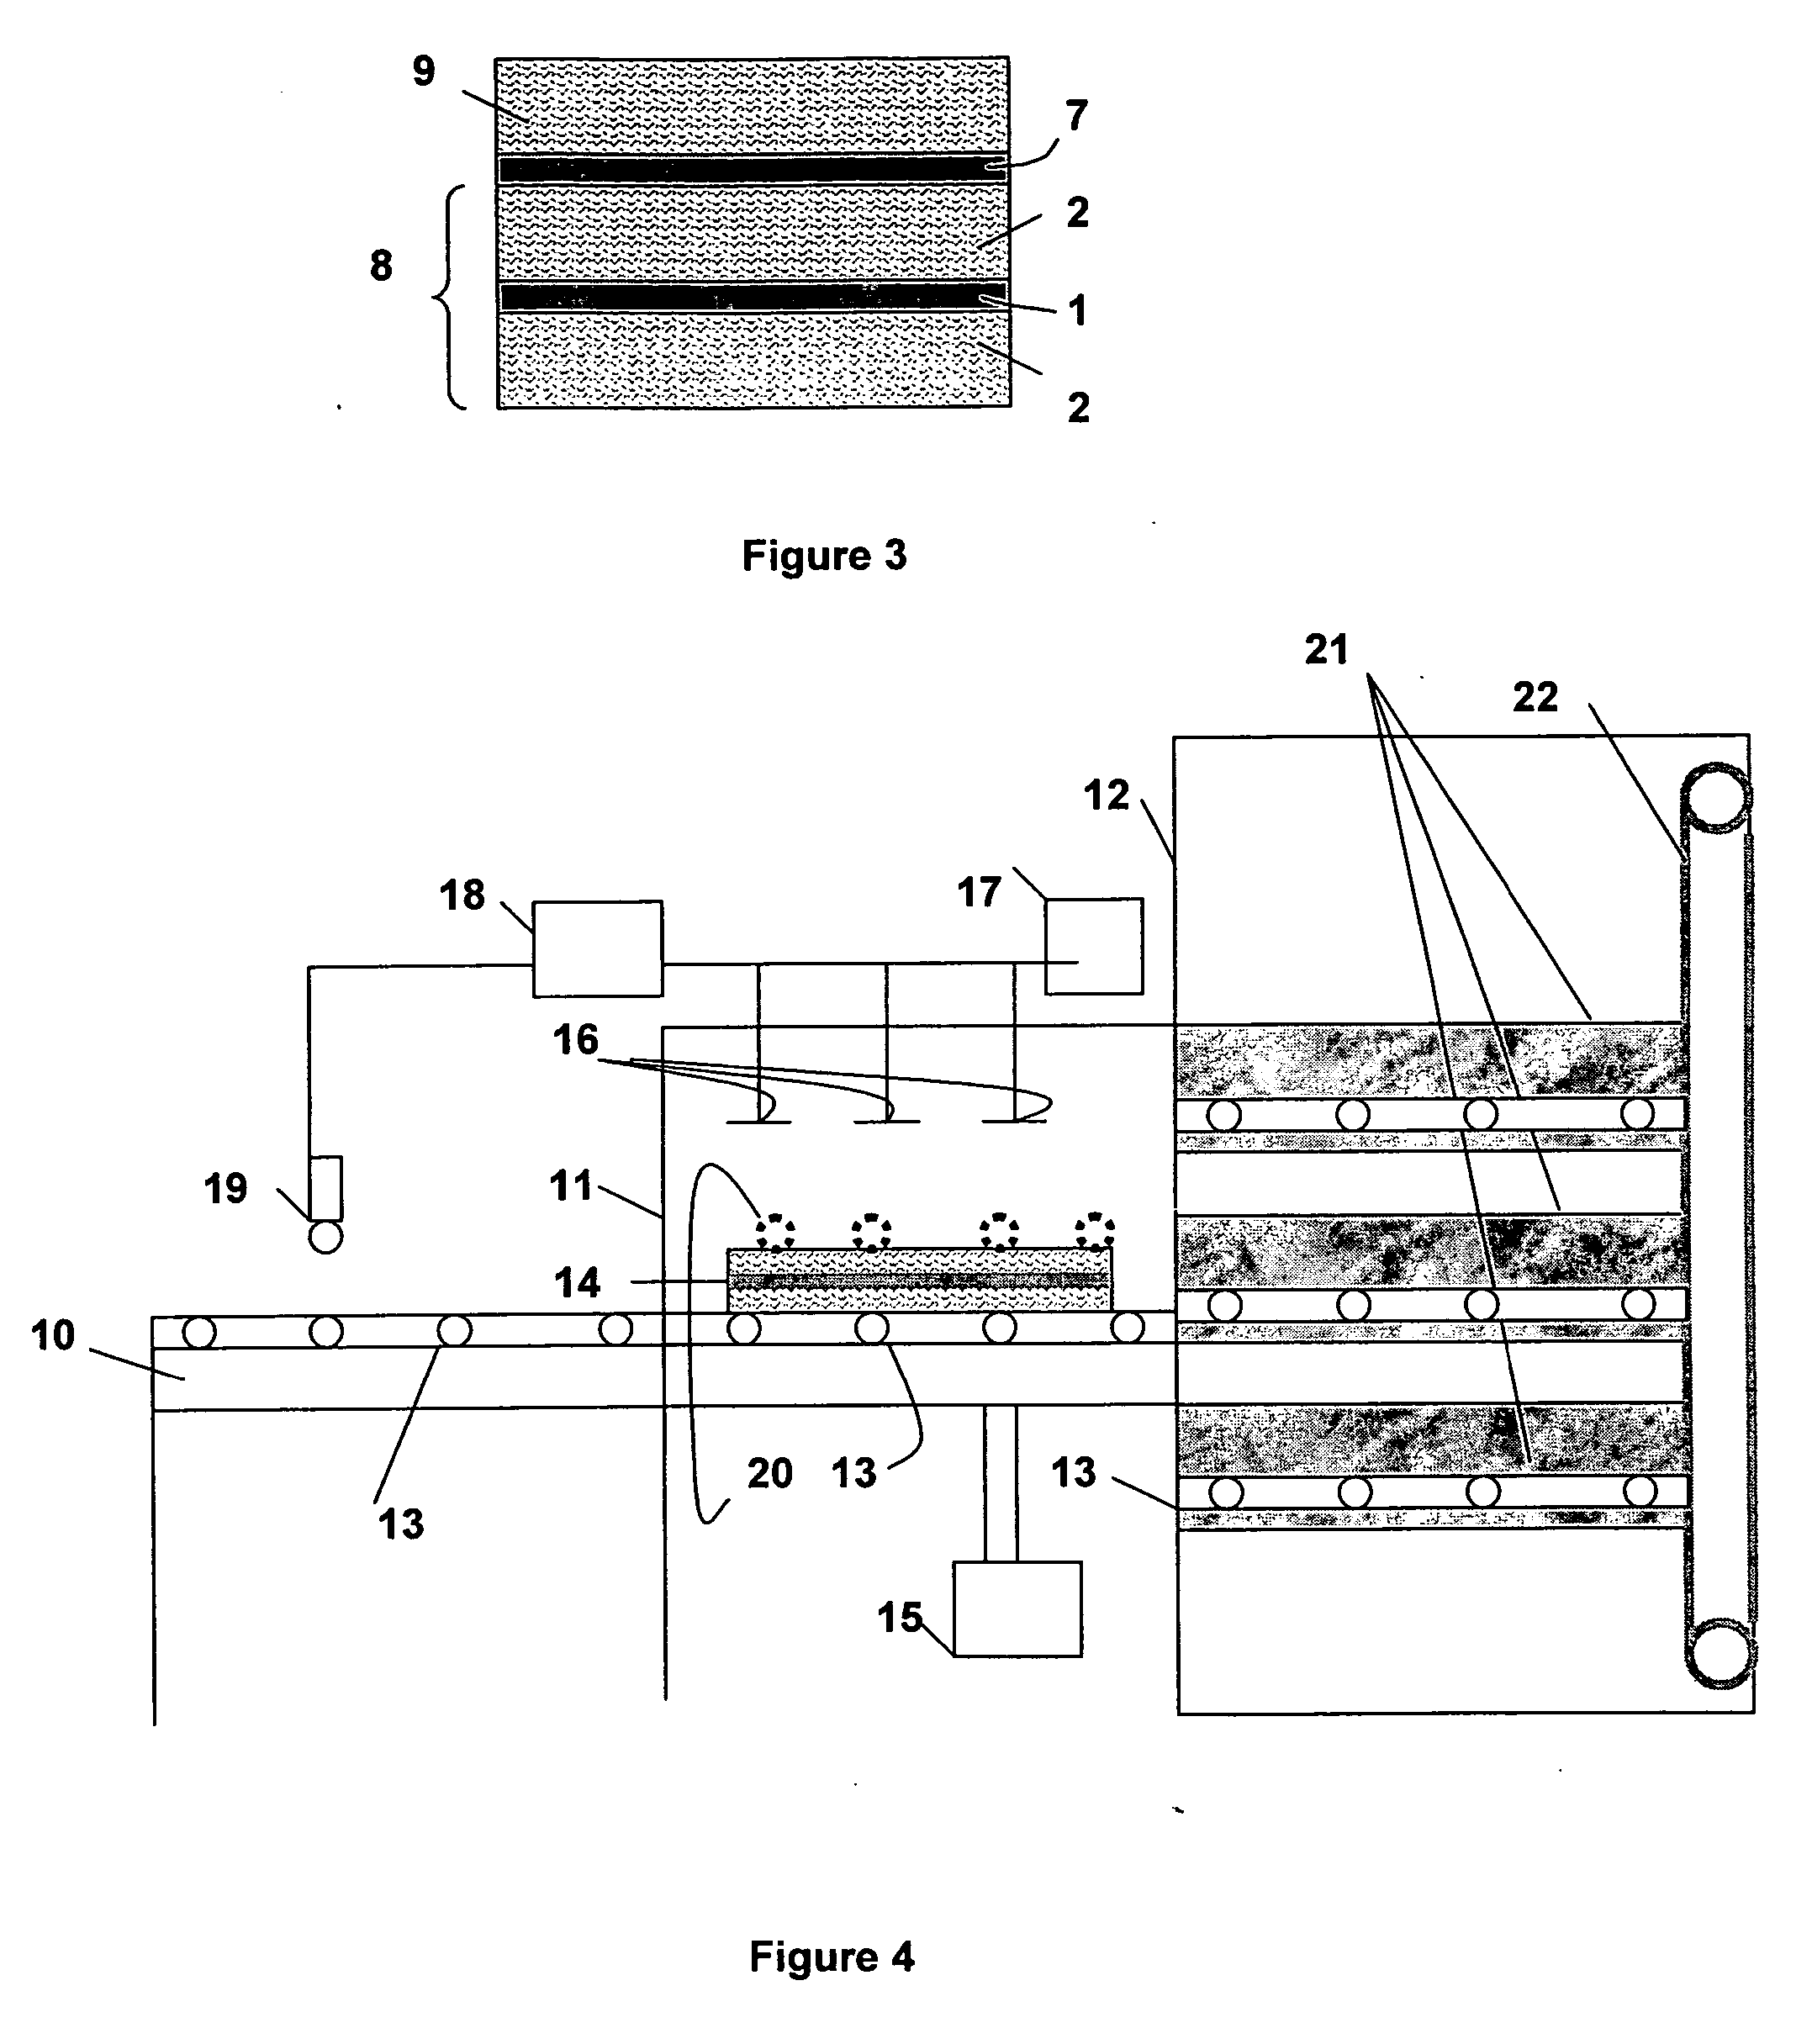 Method and apparatus for laminating glass sheets